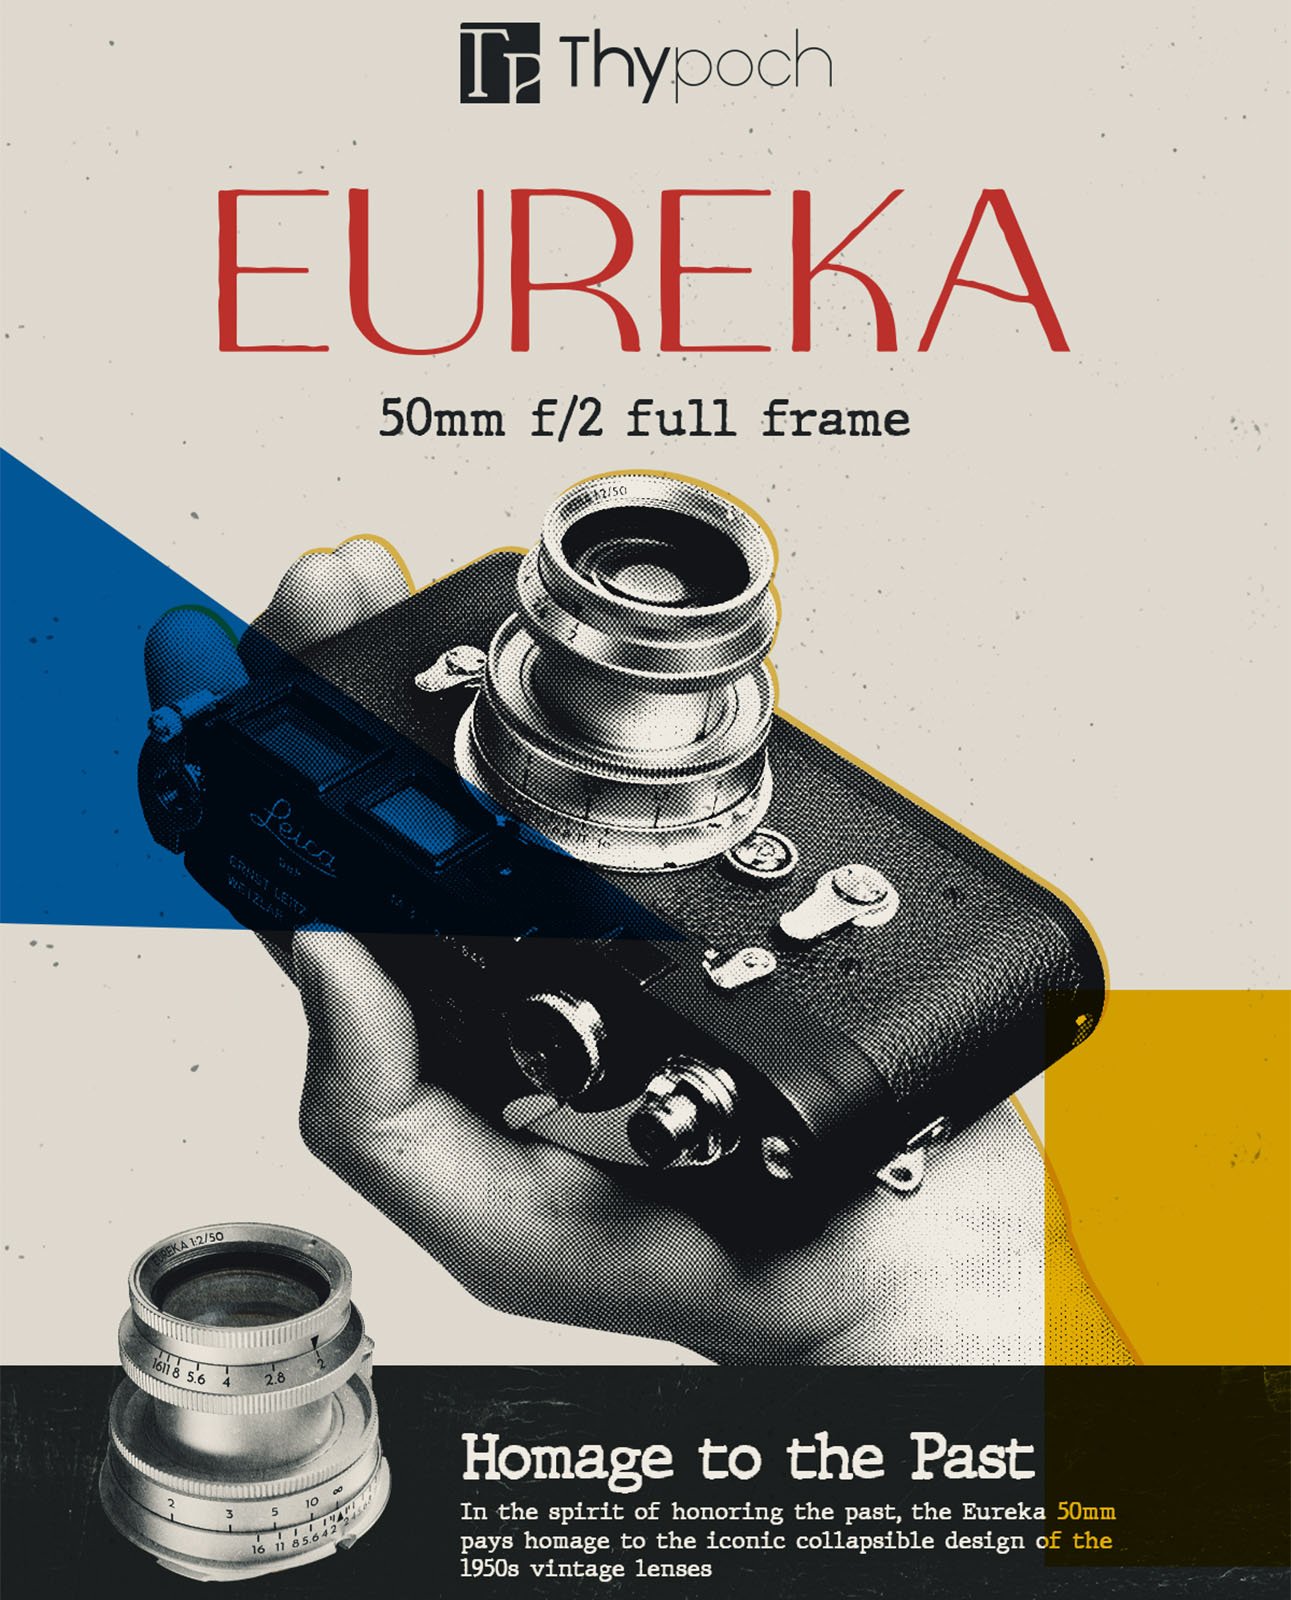 Poster promoting "Eureka," a vintage-style full-frame 50mm f/2 camera lens by Thypoch. The image shows a hand holding the retro camera with the lens attached. The text highlights the homage to 1950s collapsible lens designs.